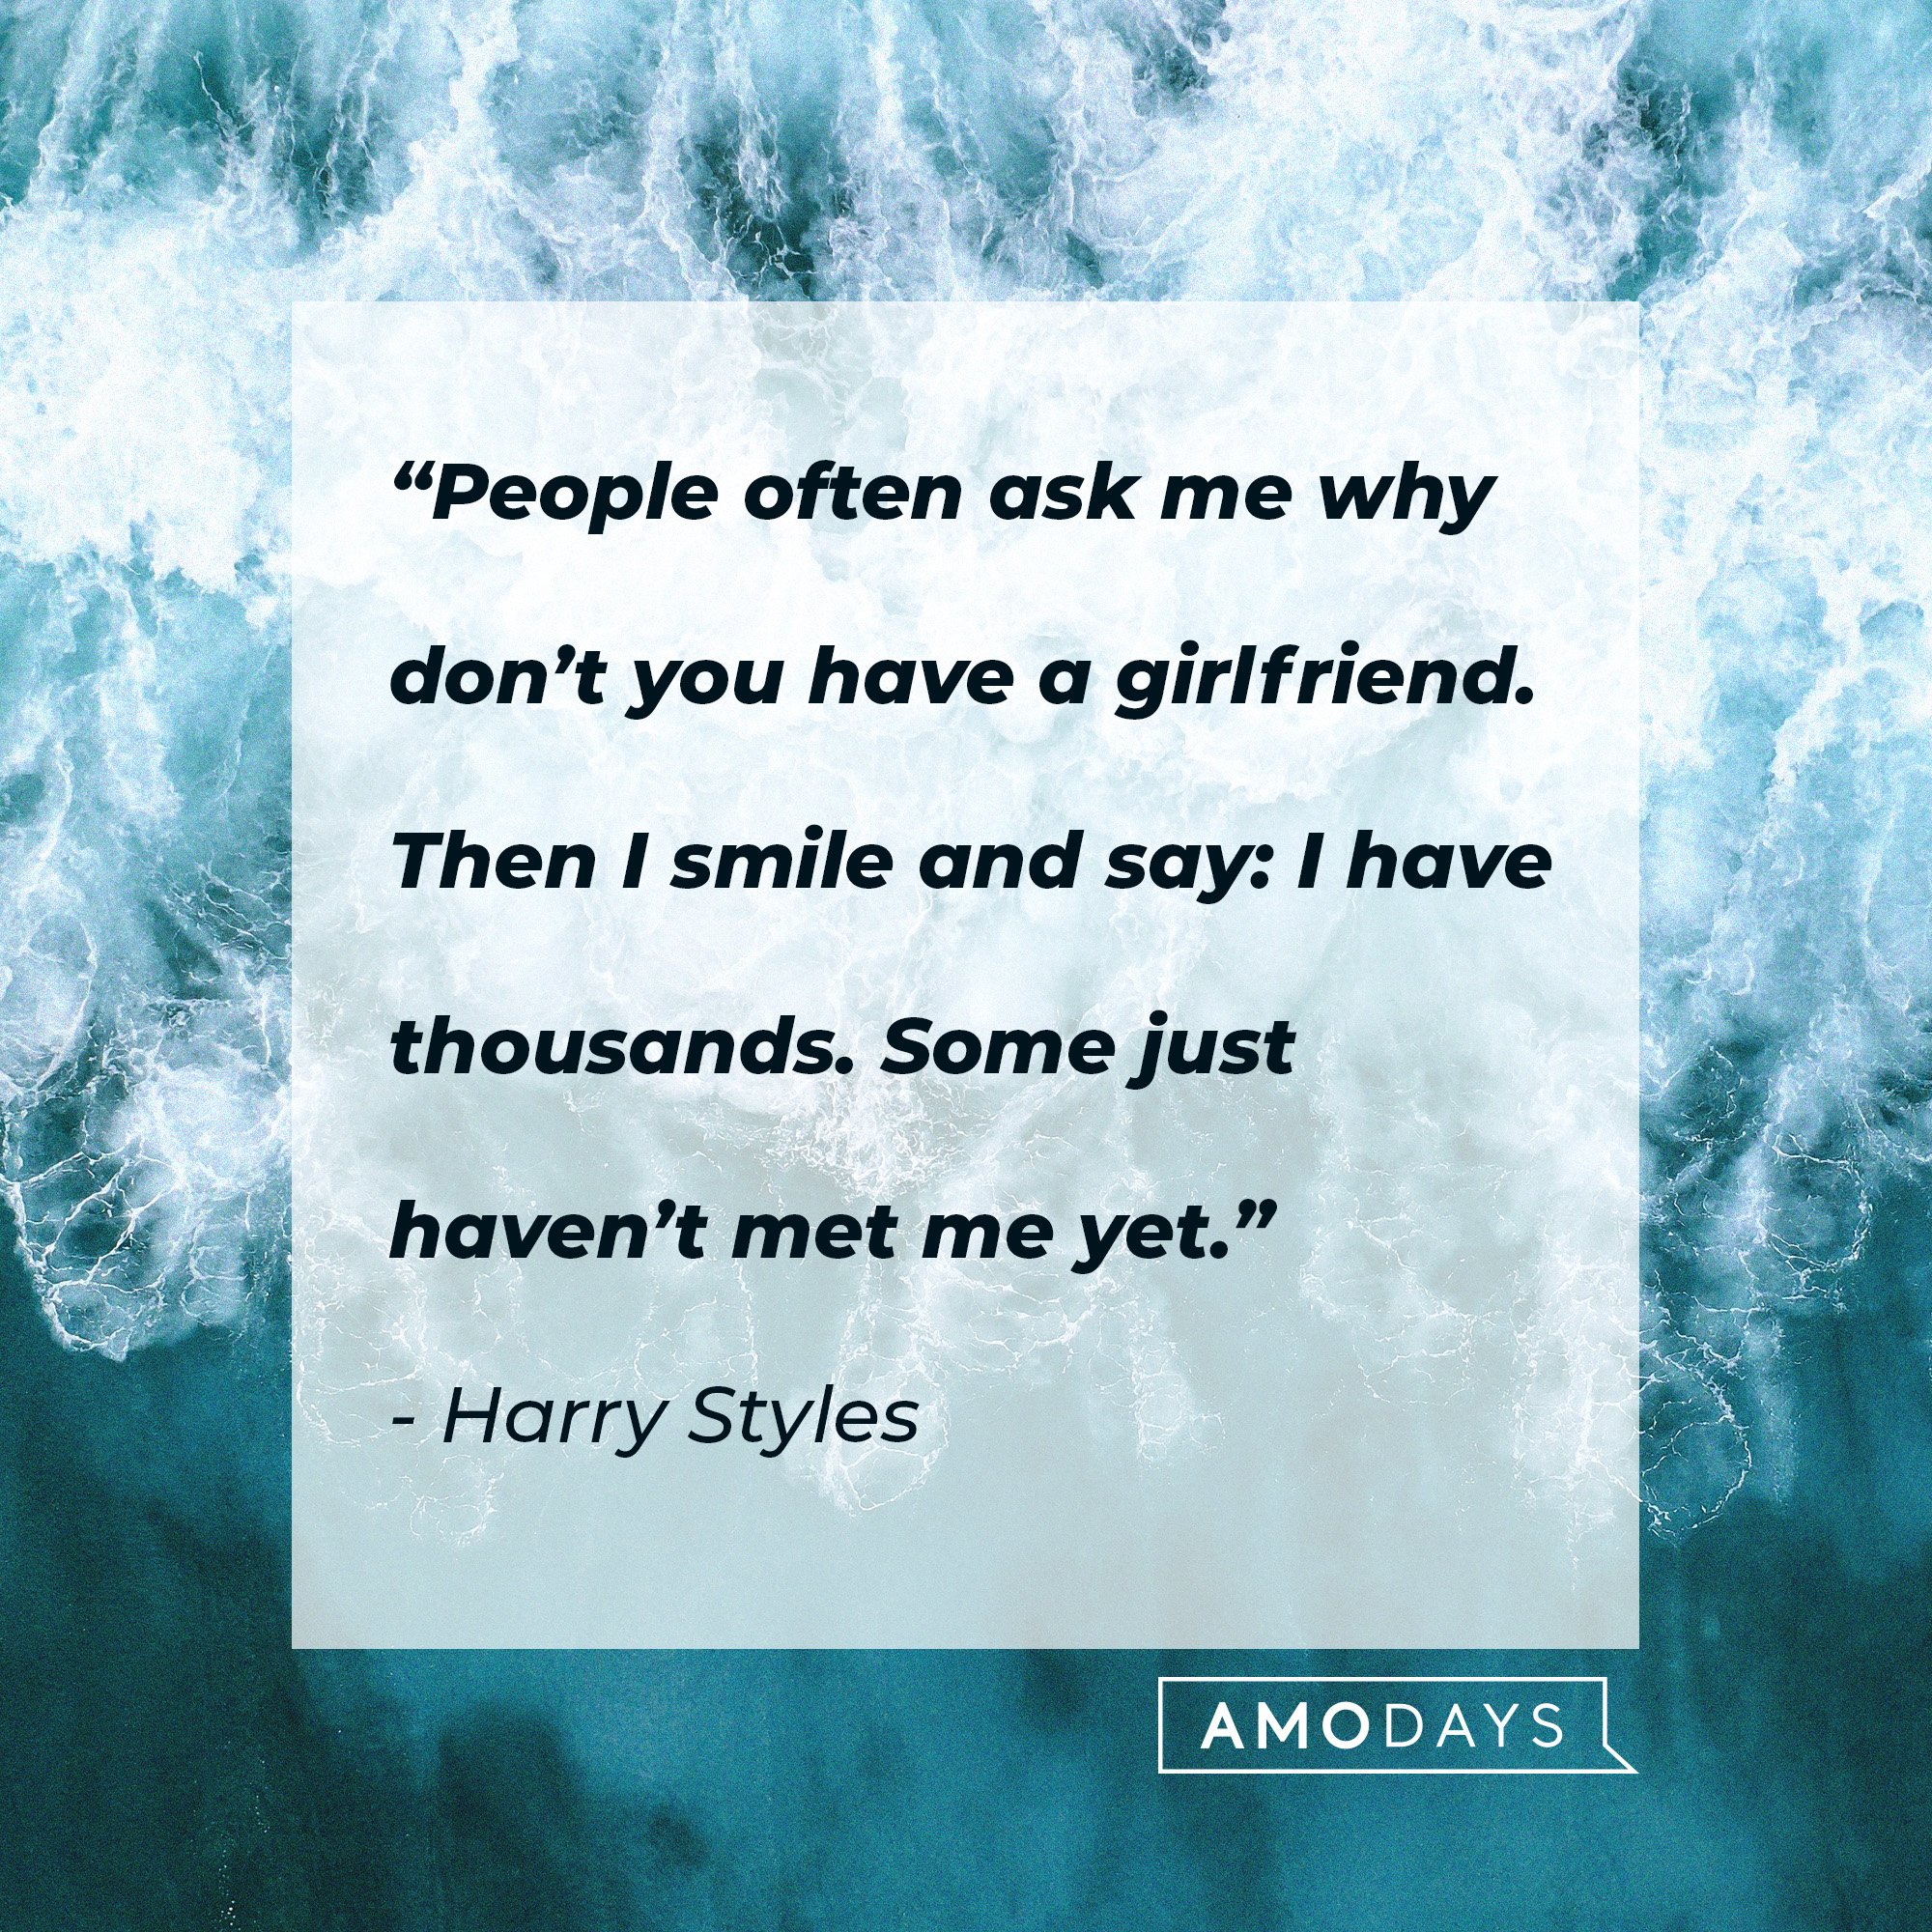 Harry Styles' quote: "People often ask me why don’t you have a girlfriend. Then I smile and say: I have thousands. Some just haven’t met me yet." | Source: AmoDays